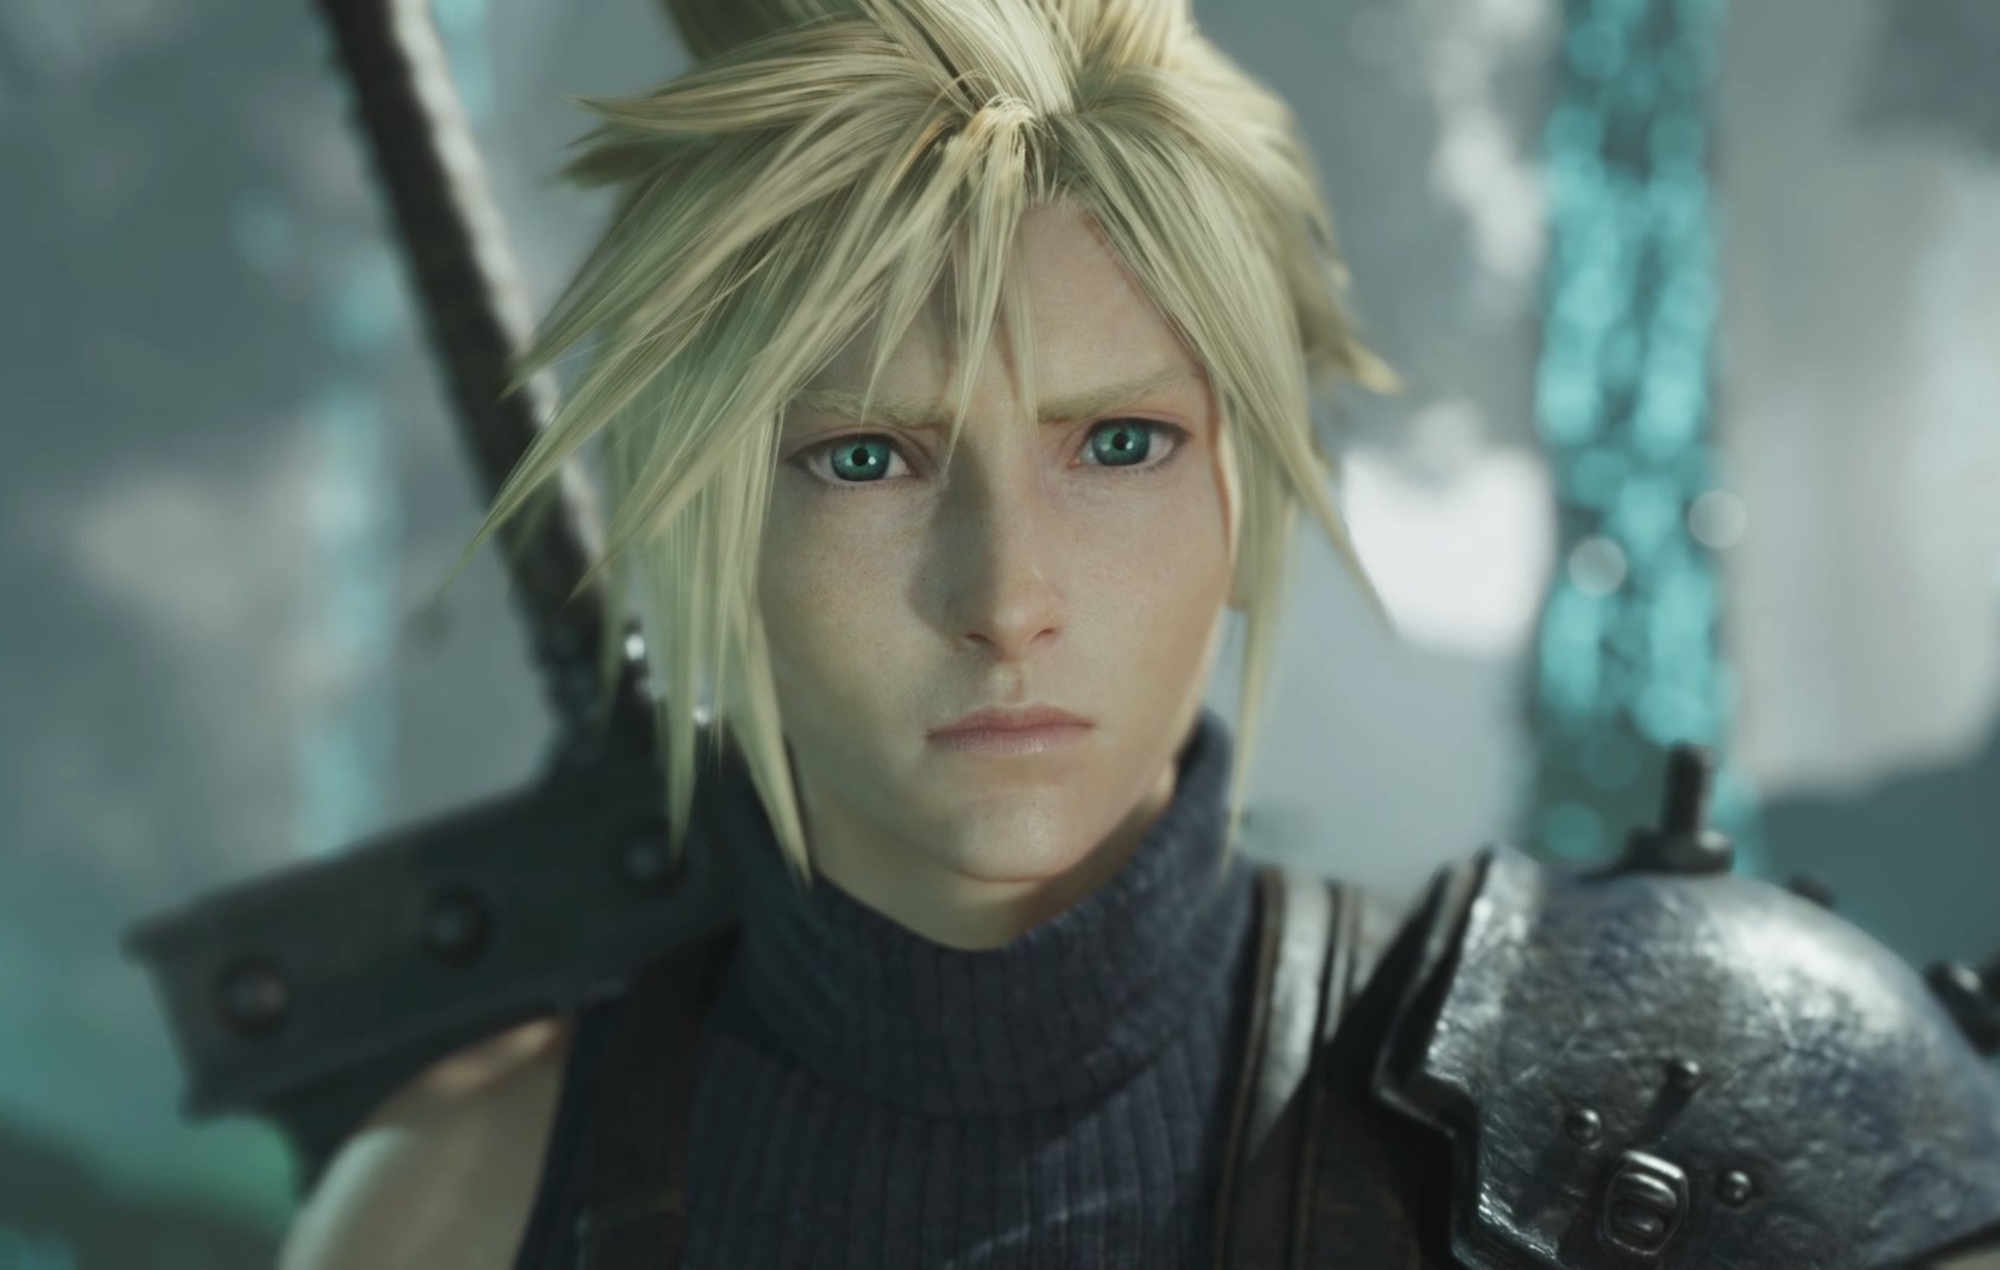 ‘Final Fantasy’ creator has no interest in returning to make another game